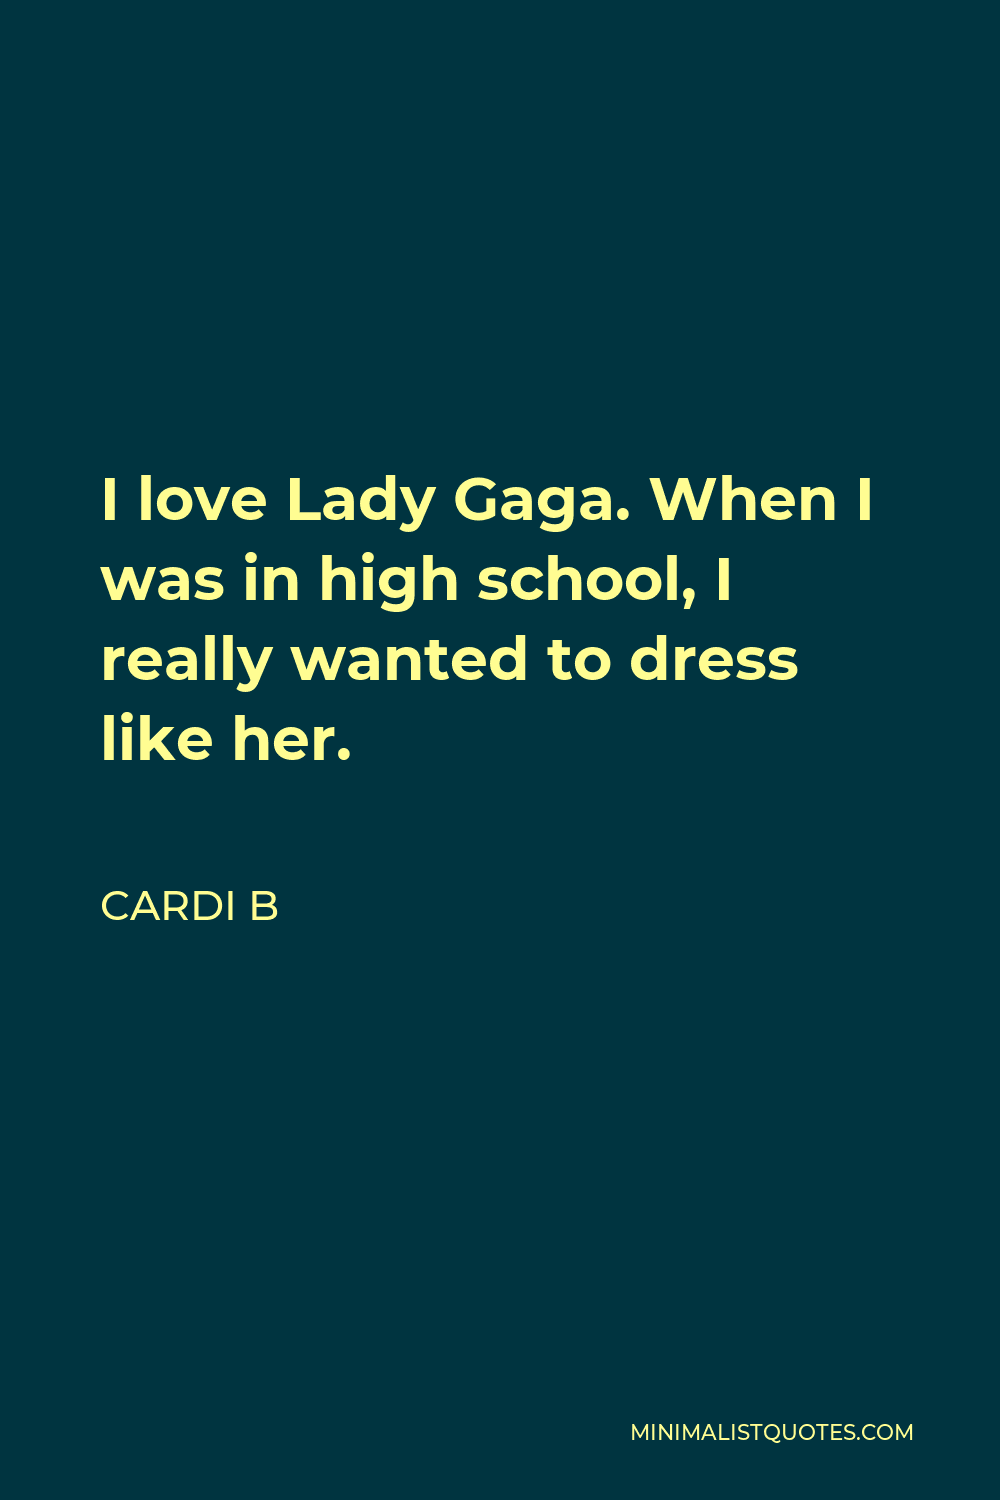 Cardi B Quote - I love Lady Gaga. When I was in high school, I really wanted to dress like her.